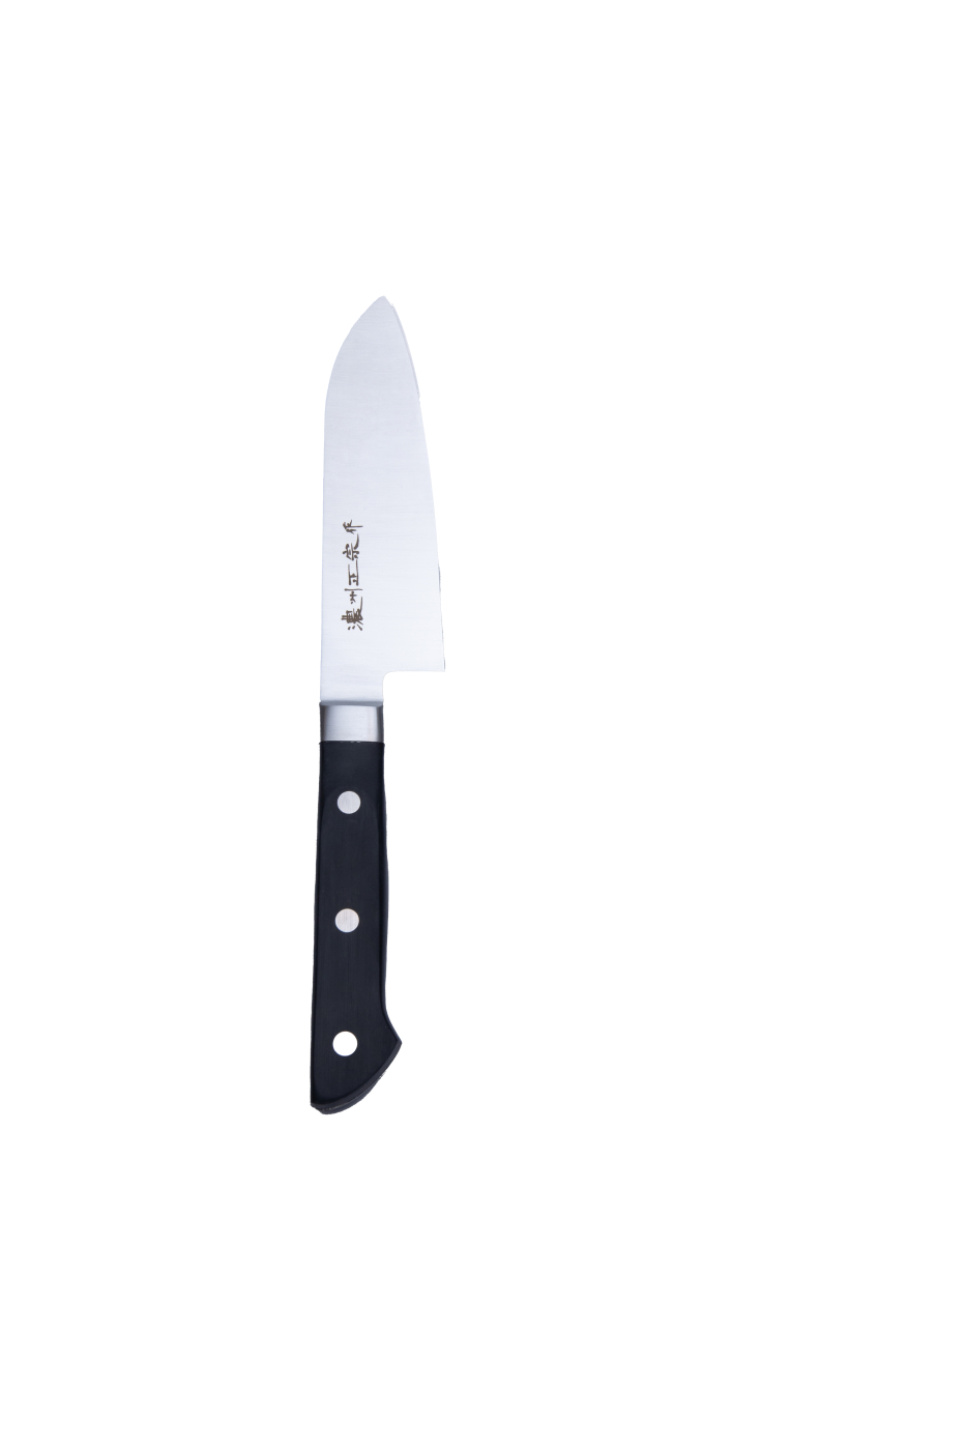 Santoku 13.5cm - Pro House in the group Cooking / Kitchen knives / Santoku knives at KitchenLab (1450-27643)